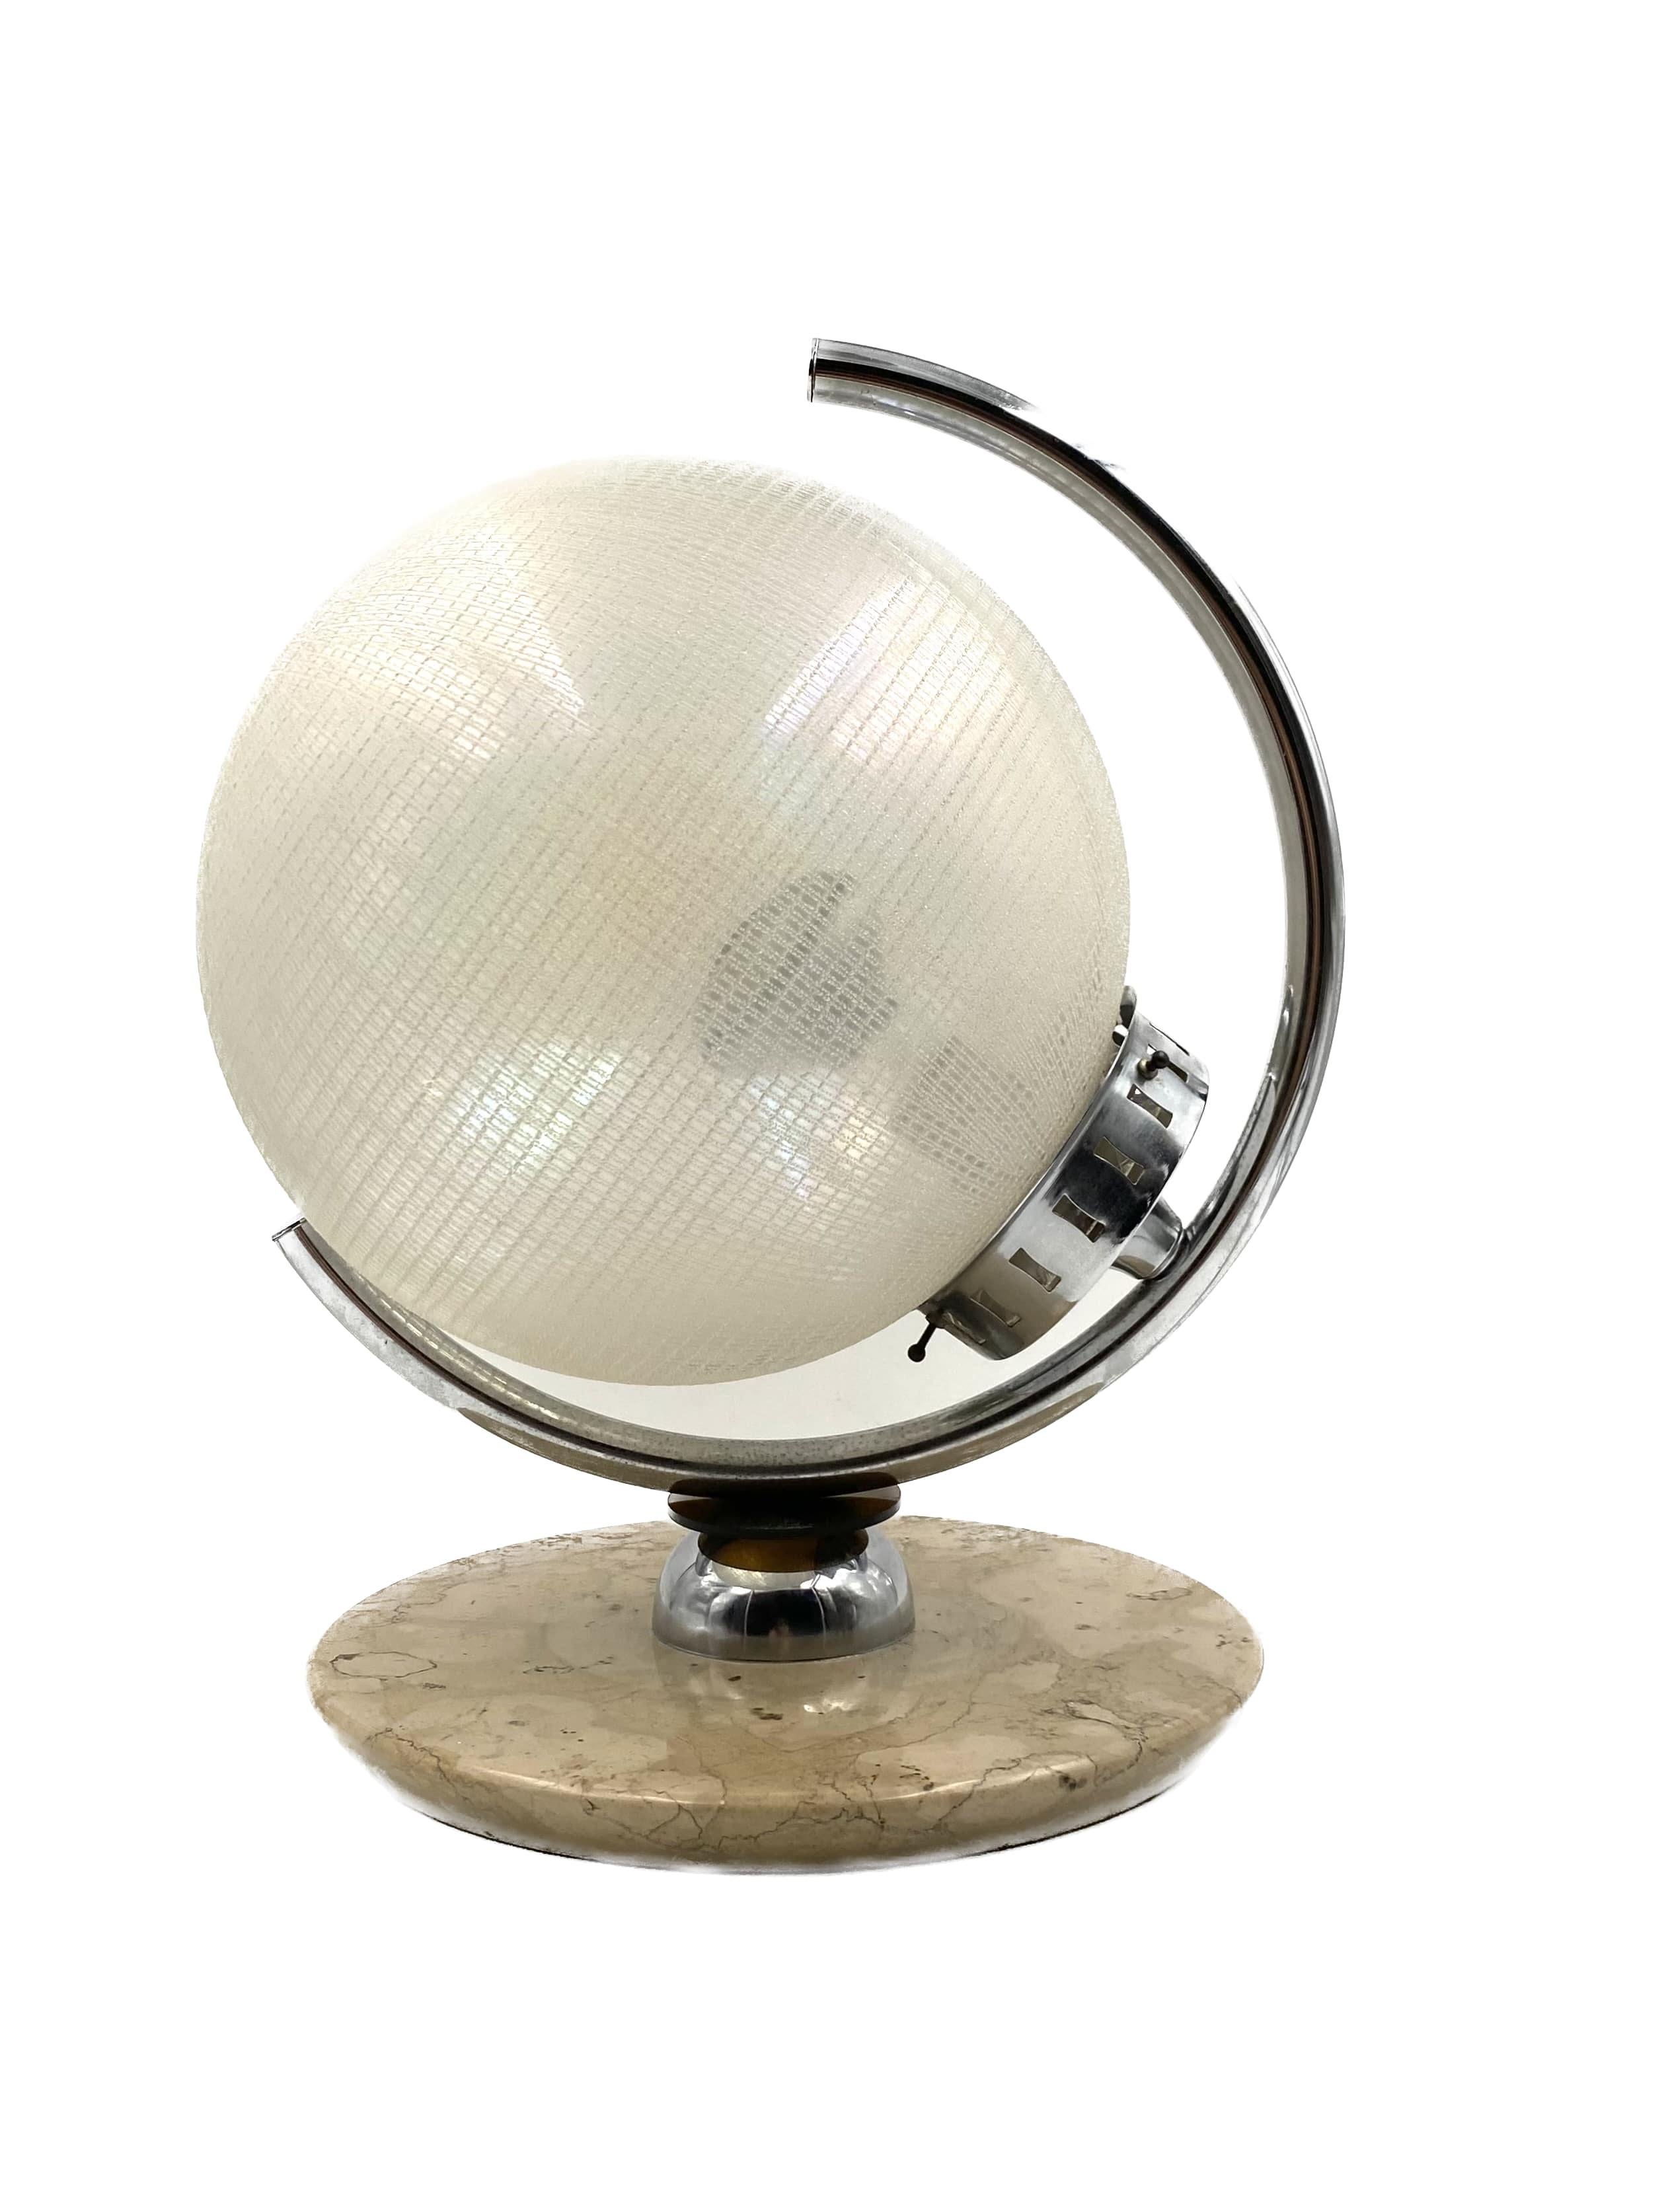 Murano glass spherical table lamp, Mazzega Italy 1970s For Sale 1